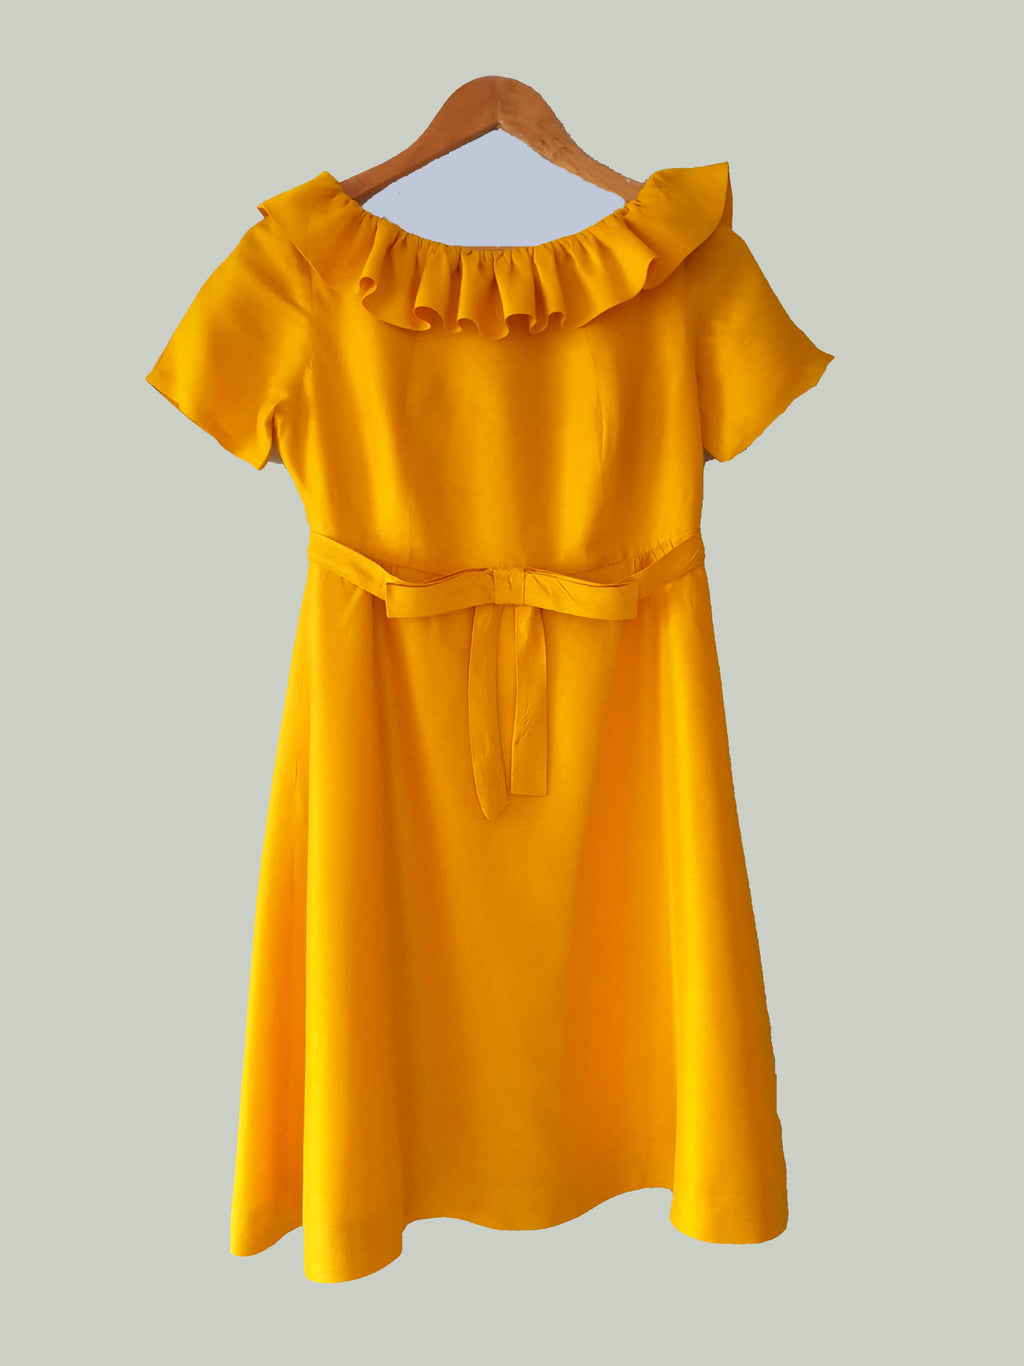 1960s vintage yellow dress with neck ruffle by marcel fenez